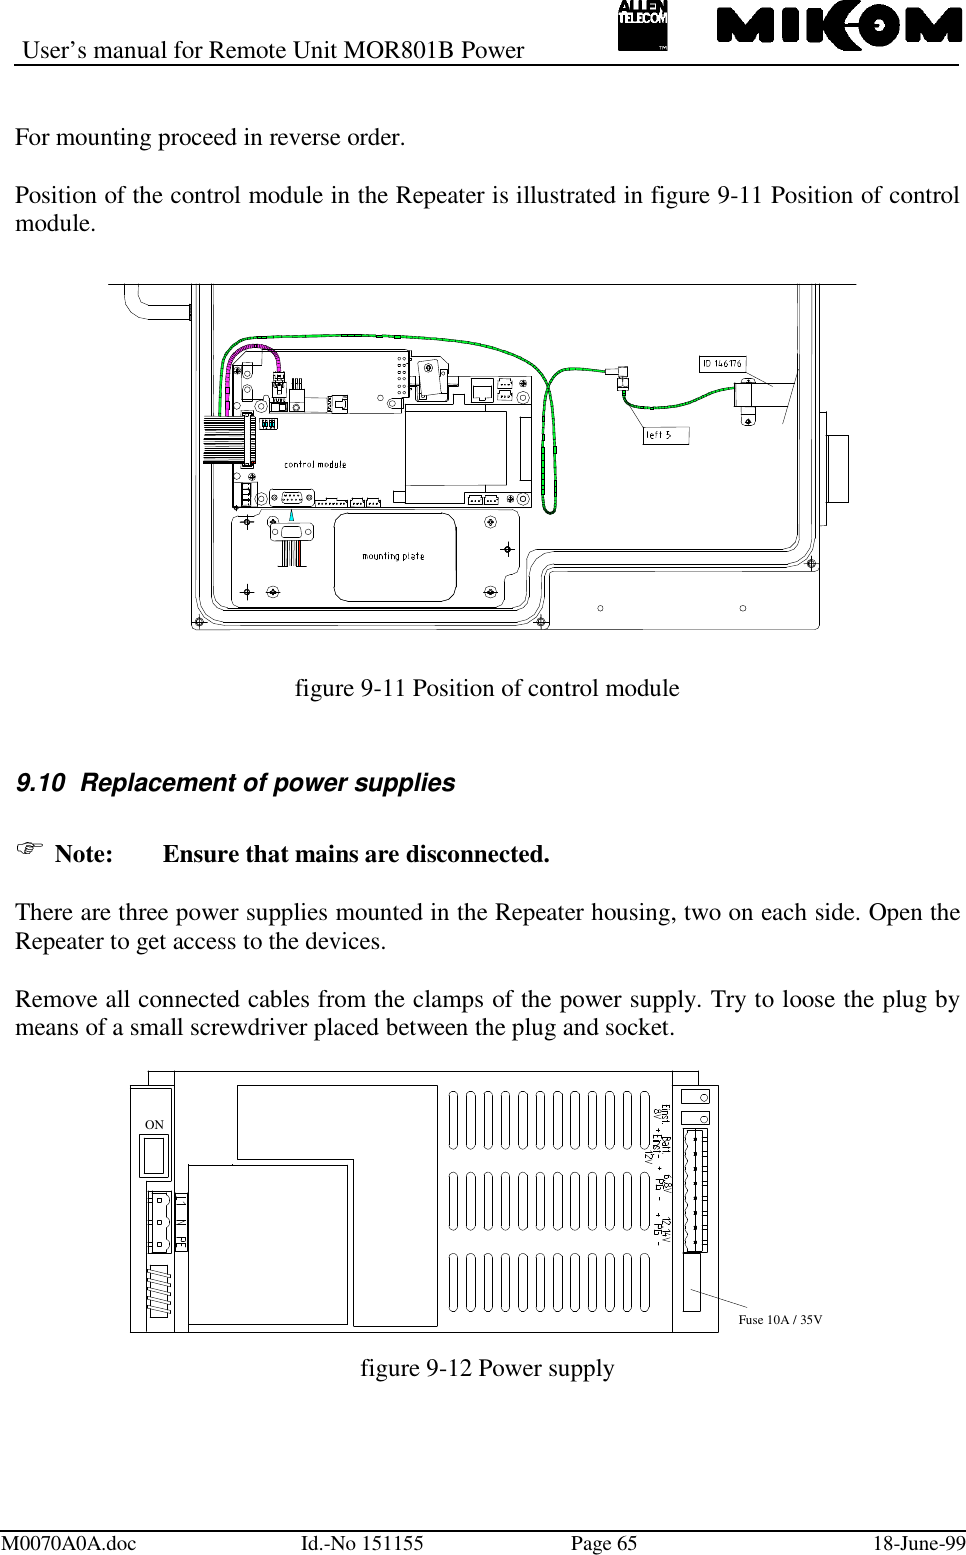 User’s manual for Remote Unit MOR801B PowerM0070A0A.doc Id.-No 151155 Page 65 18-June-99For mounting proceed in reverse order.Position of the control module in the Repeater is illustrated in figure 9-11 Position of controlmodule.figure 9-11 Position of control module9.10  Replacement of power supplies Note: Ensure that mains are disconnected.There are three power supplies mounted in the Repeater housing, two on each side. Open theRepeater to get access to the devices.Remove all connected cables from the clamps of the power supply. Try to loose the plug bymeans of a small screwdriver placed between the plug and socket.ONFuse 10A / 35Vfigure 9-12 Power supply